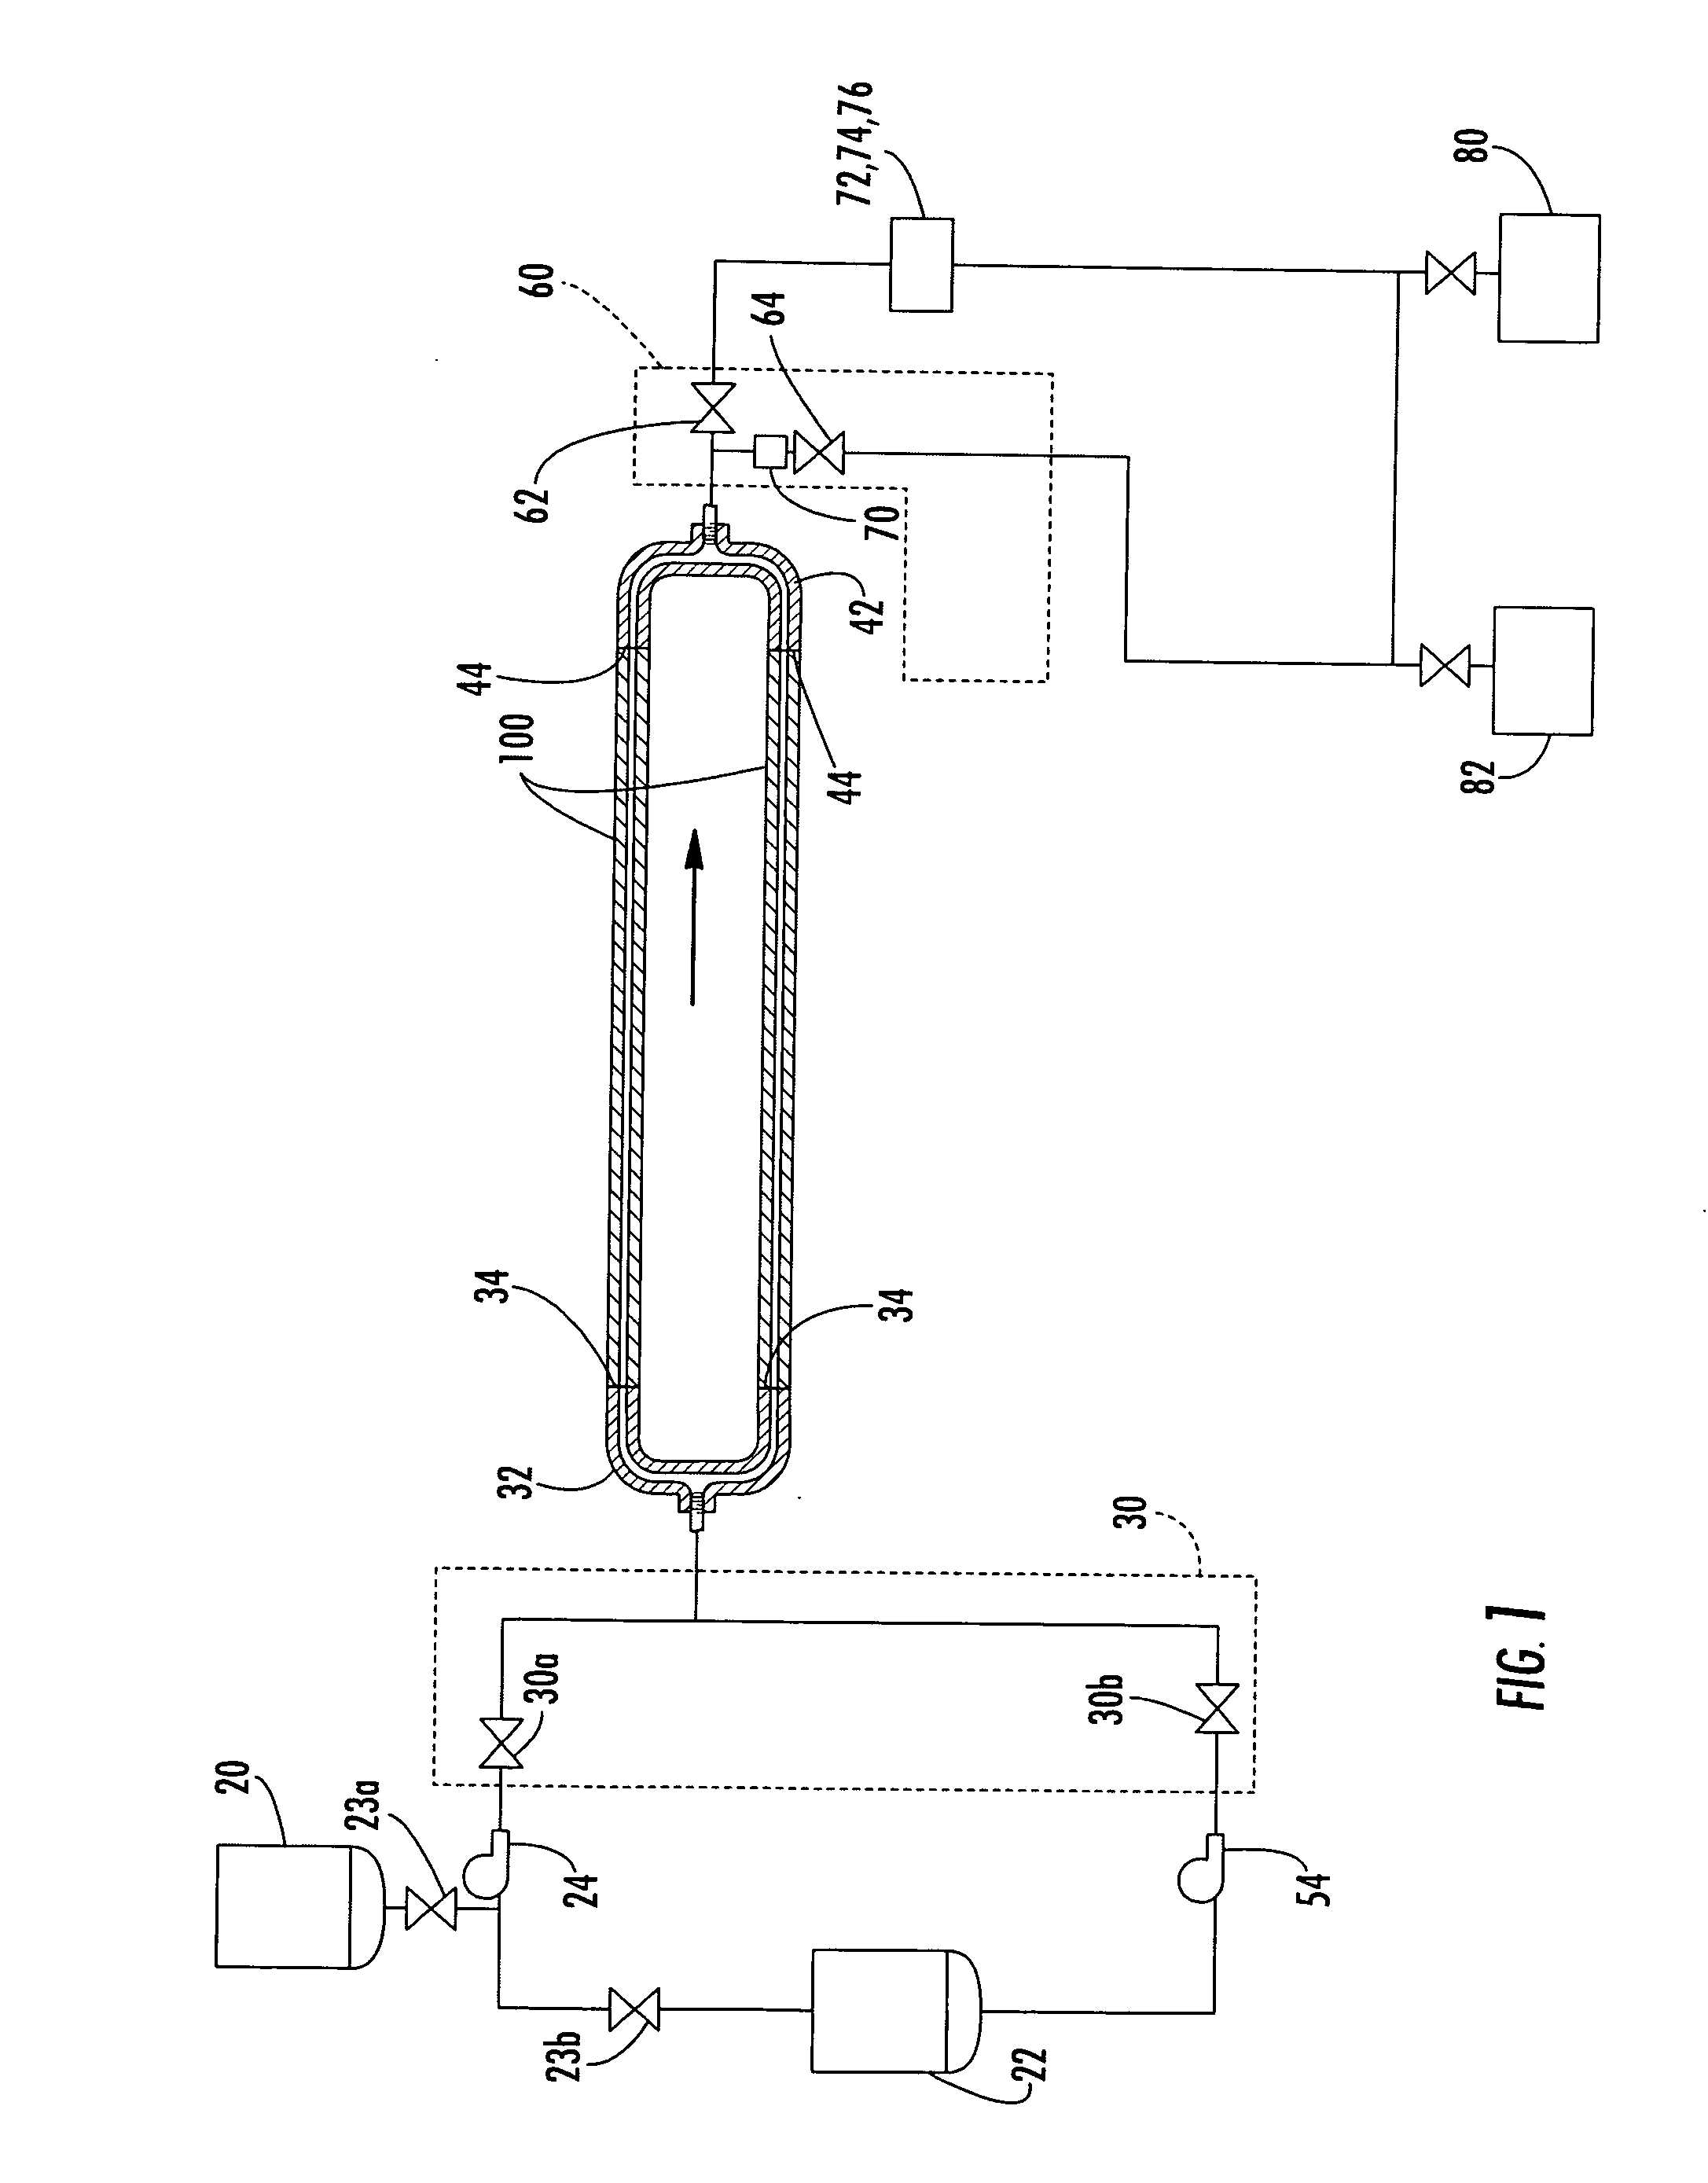 Combined pressure test and clean apparatus